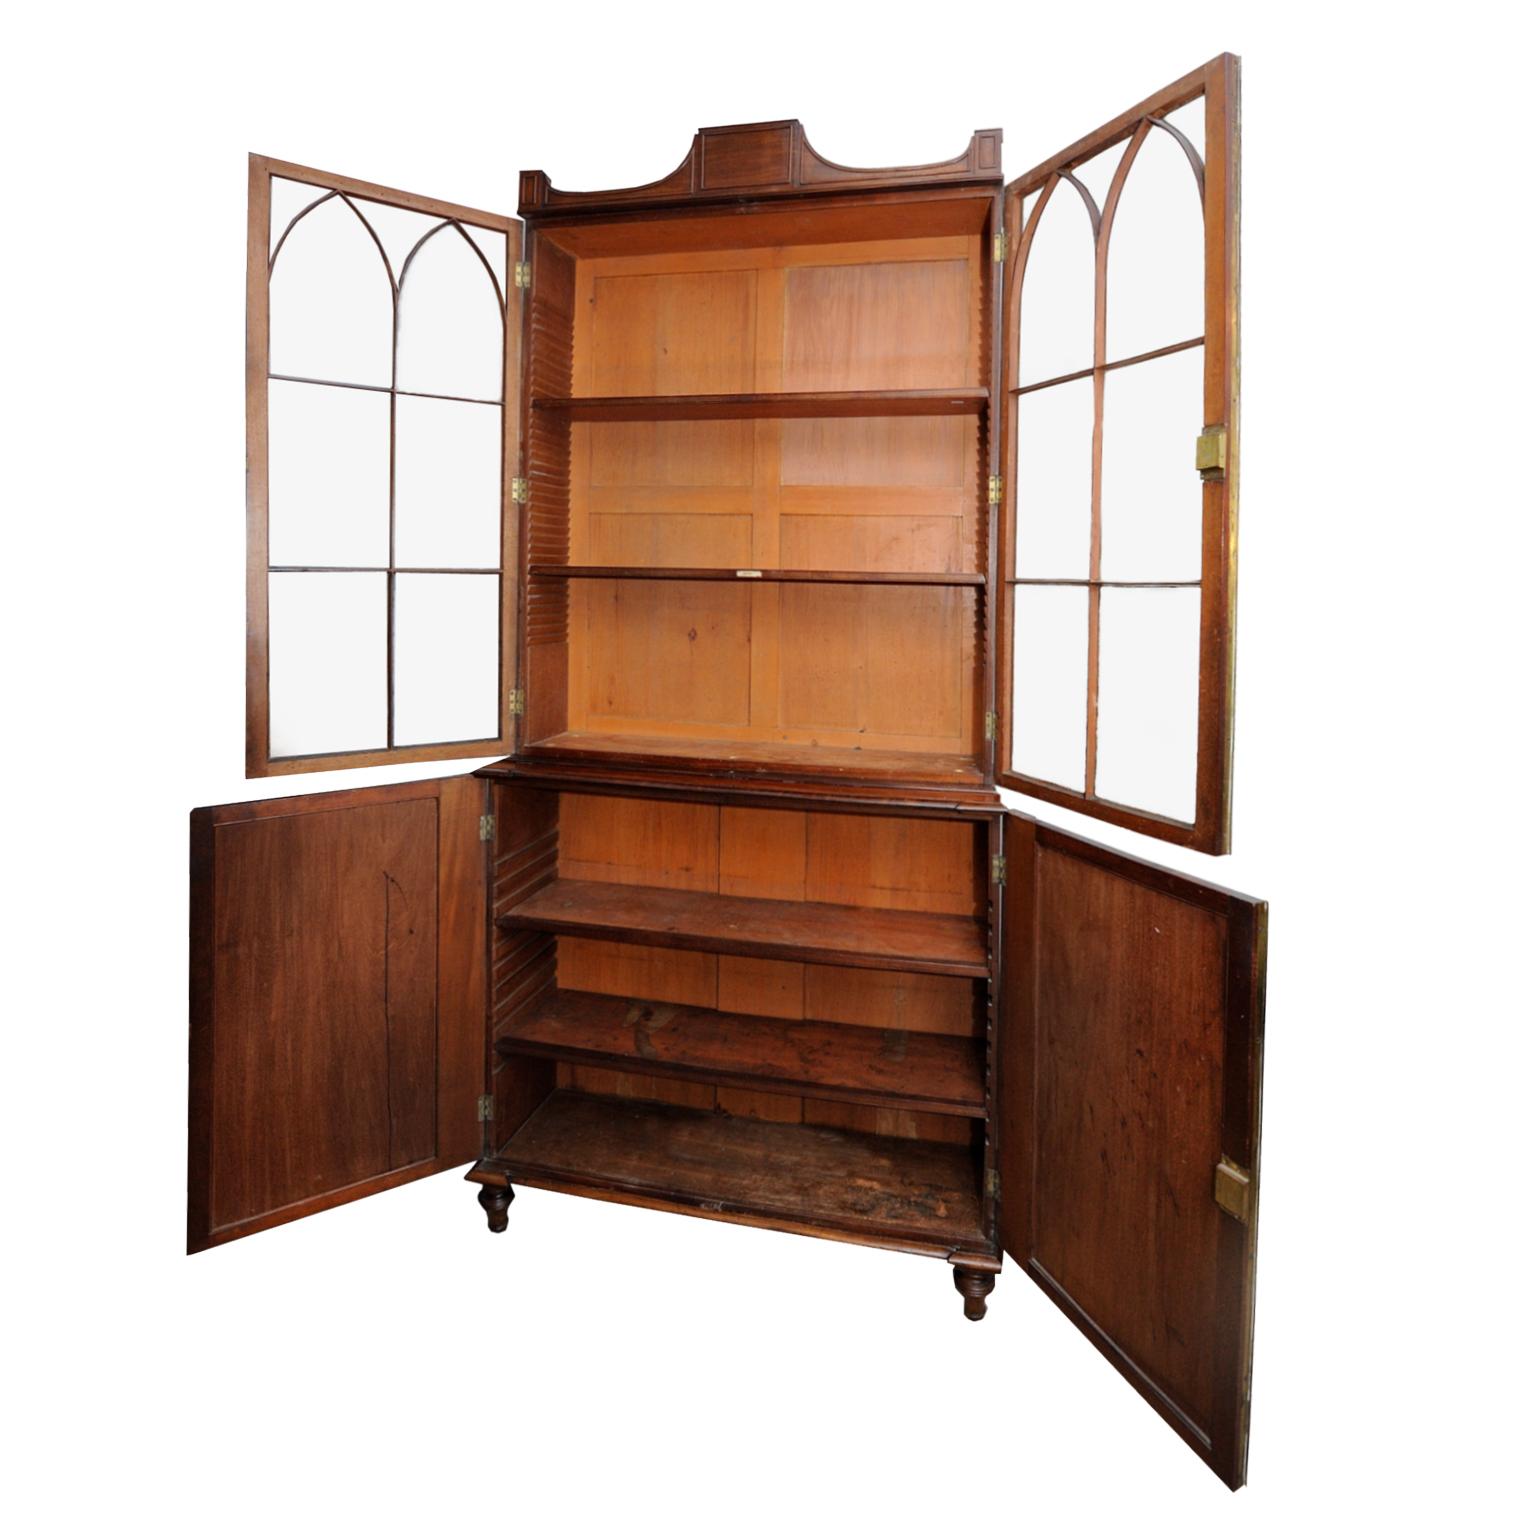 English George III Mahogany Gillows Glazed Bookcase, circa 1780 In Good Condition For Sale In Tetbury, Gloucestershire